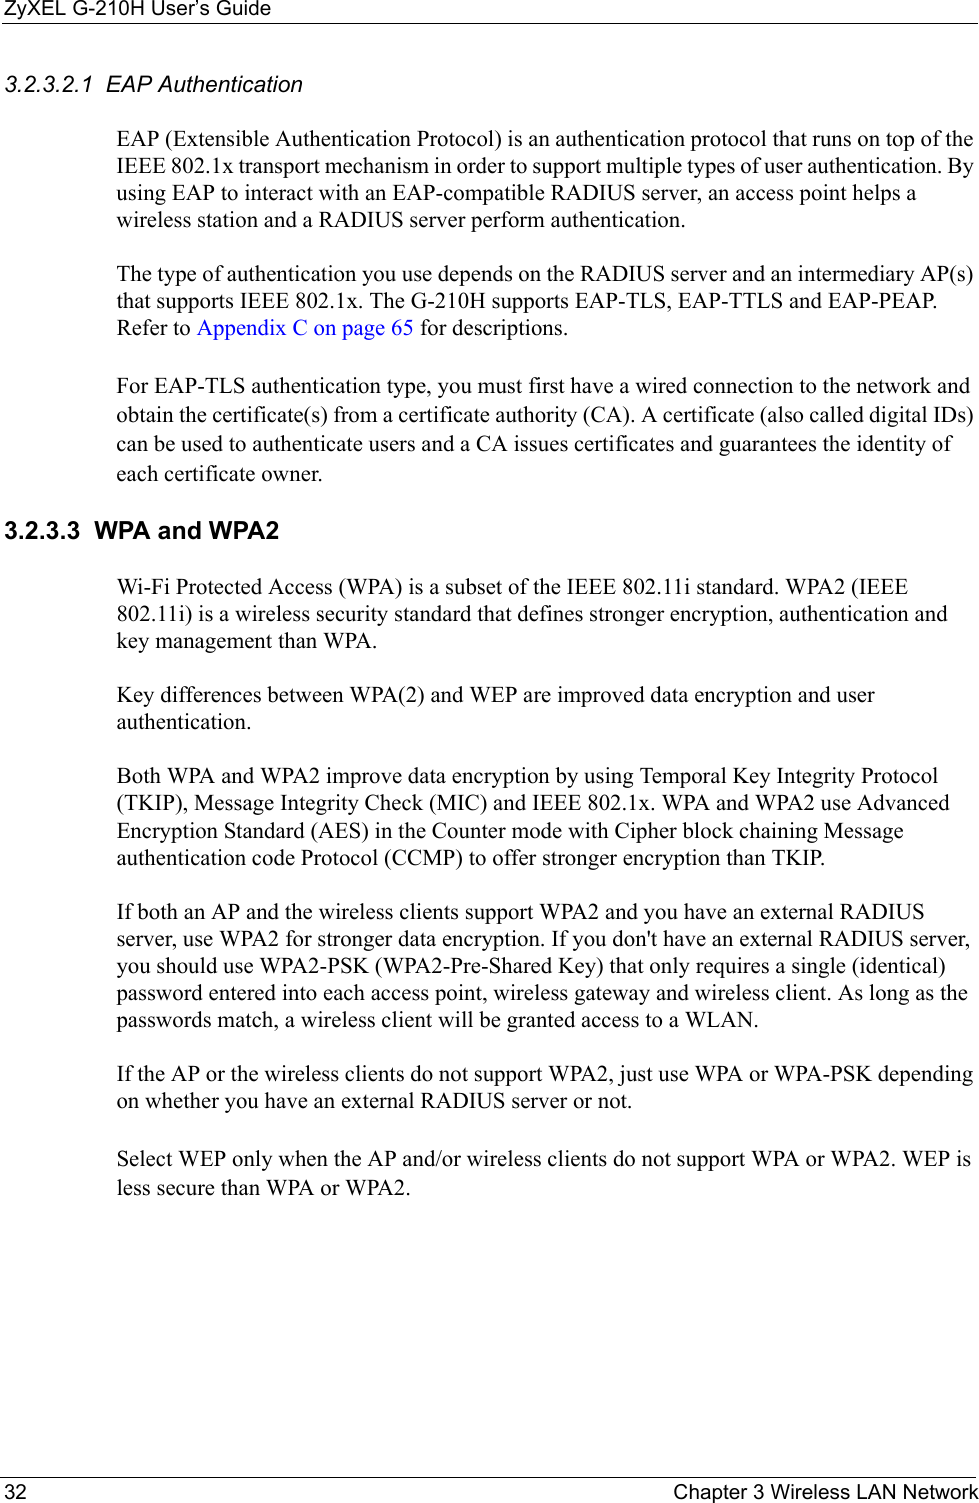 ZyXEL G-210H User’s Guide32 Chapter 3 Wireless LAN Network3.2.3.2.1  EAP Authentication EAP (Extensible Authentication Protocol) is an authentication protocol that runs on top of the IEEE 802.1x transport mechanism in order to support multiple types of user authentication. By using EAP to interact with an EAP-compatible RADIUS server, an access point helps a wireless station and a RADIUS server perform authentication. The type of authentication you use depends on the RADIUS server and an intermediary AP(s) that supports IEEE 802.1x. The G-210H supports EAP-TLS, EAP-TTLS and EAP-PEAP. Refer to Appendix C on page 65 for descriptions.For EAP-TLS authentication type, you must first have a wired connection to the network and obtain the certificate(s) from a certificate authority (CA). A certificate (also called digital IDs) can be used to authenticate users and a CA issues certificates and guarantees the identity of each certificate owner.3.2.3.3  WPA and WPA2 Wi-Fi Protected Access (WPA) is a subset of the IEEE 802.11i standard. WPA2 (IEEE 802.11i) is a wireless security standard that defines stronger encryption, authentication and key management than WPA. Key differences between WPA(2) and WEP are improved data encryption and user authentication.Both WPA and WPA2 improve data encryption by using Temporal Key Integrity Protocol (TKIP), Message Integrity Check (MIC) and IEEE 802.1x. WPA and WPA2 use Advanced Encryption Standard (AES) in the Counter mode with Cipher block chaining Message authentication code Protocol (CCMP) to offer stronger encryption than TKIP.If both an AP and the wireless clients support WPA2 and you have an external RADIUS server, use WPA2 for stronger data encryption. If you don&apos;t have an external RADIUS server, you should use WPA2-PSK (WPA2-Pre-Shared Key) that only requires a single (identical) password entered into each access point, wireless gateway and wireless client. As long as the passwords match, a wireless client will be granted access to a WLAN. If the AP or the wireless clients do not support WPA2, just use WPA or WPA-PSK depending on whether you have an external RADIUS server or not.Select WEP only when the AP and/or wireless clients do not support WPA or WPA2. WEP is less secure than WPA or WPA2.